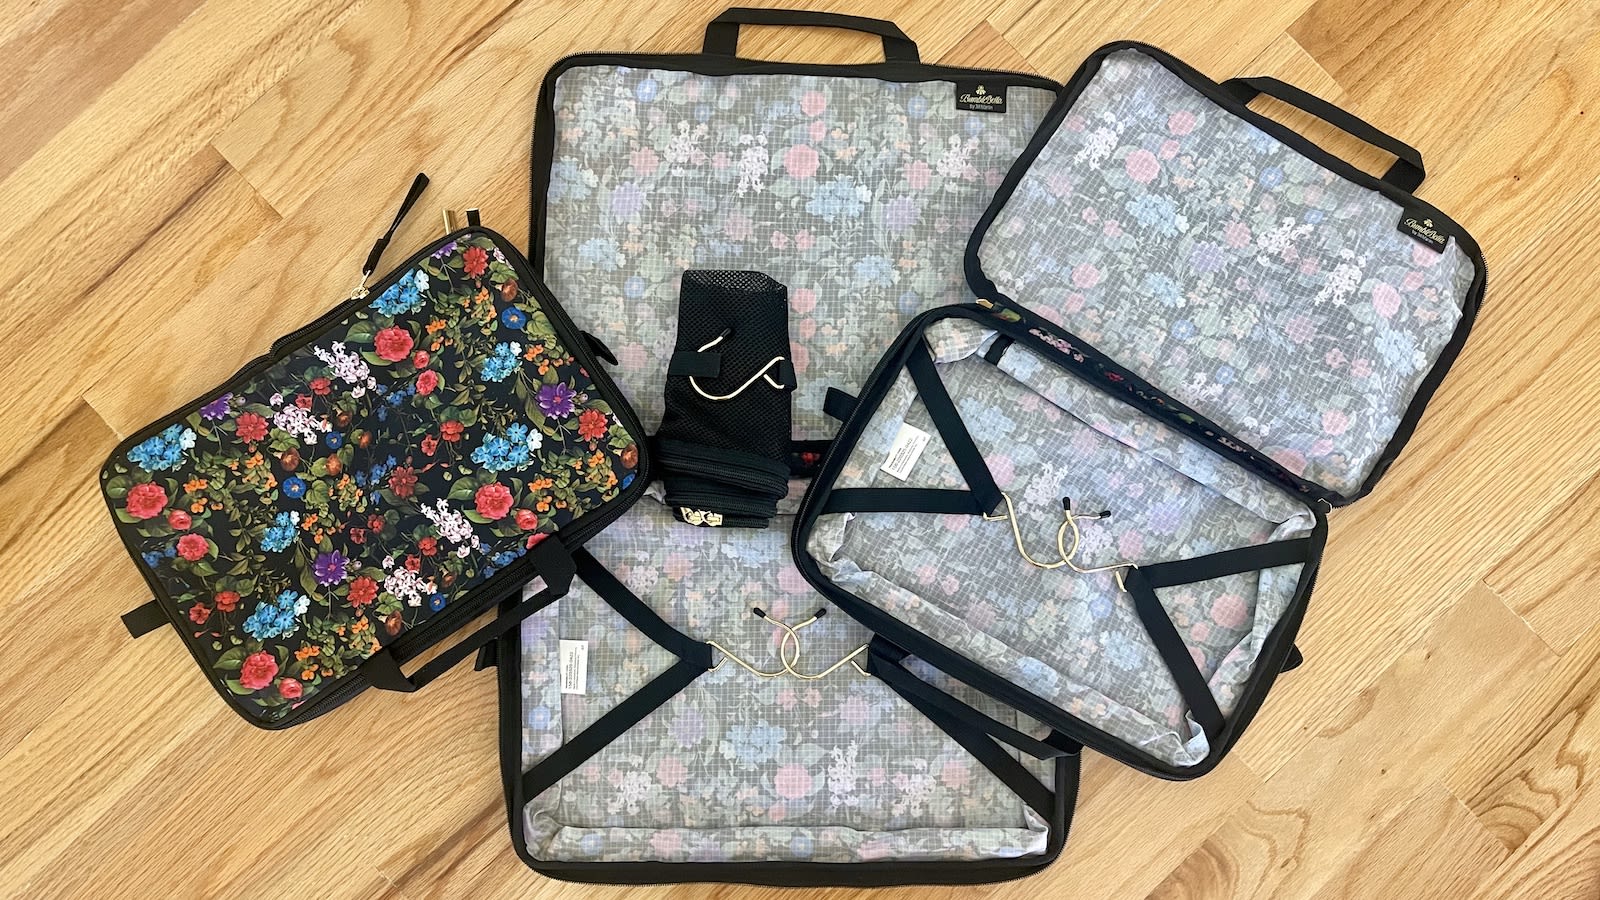 Packing Cubes Have Completely Changed How I Travel